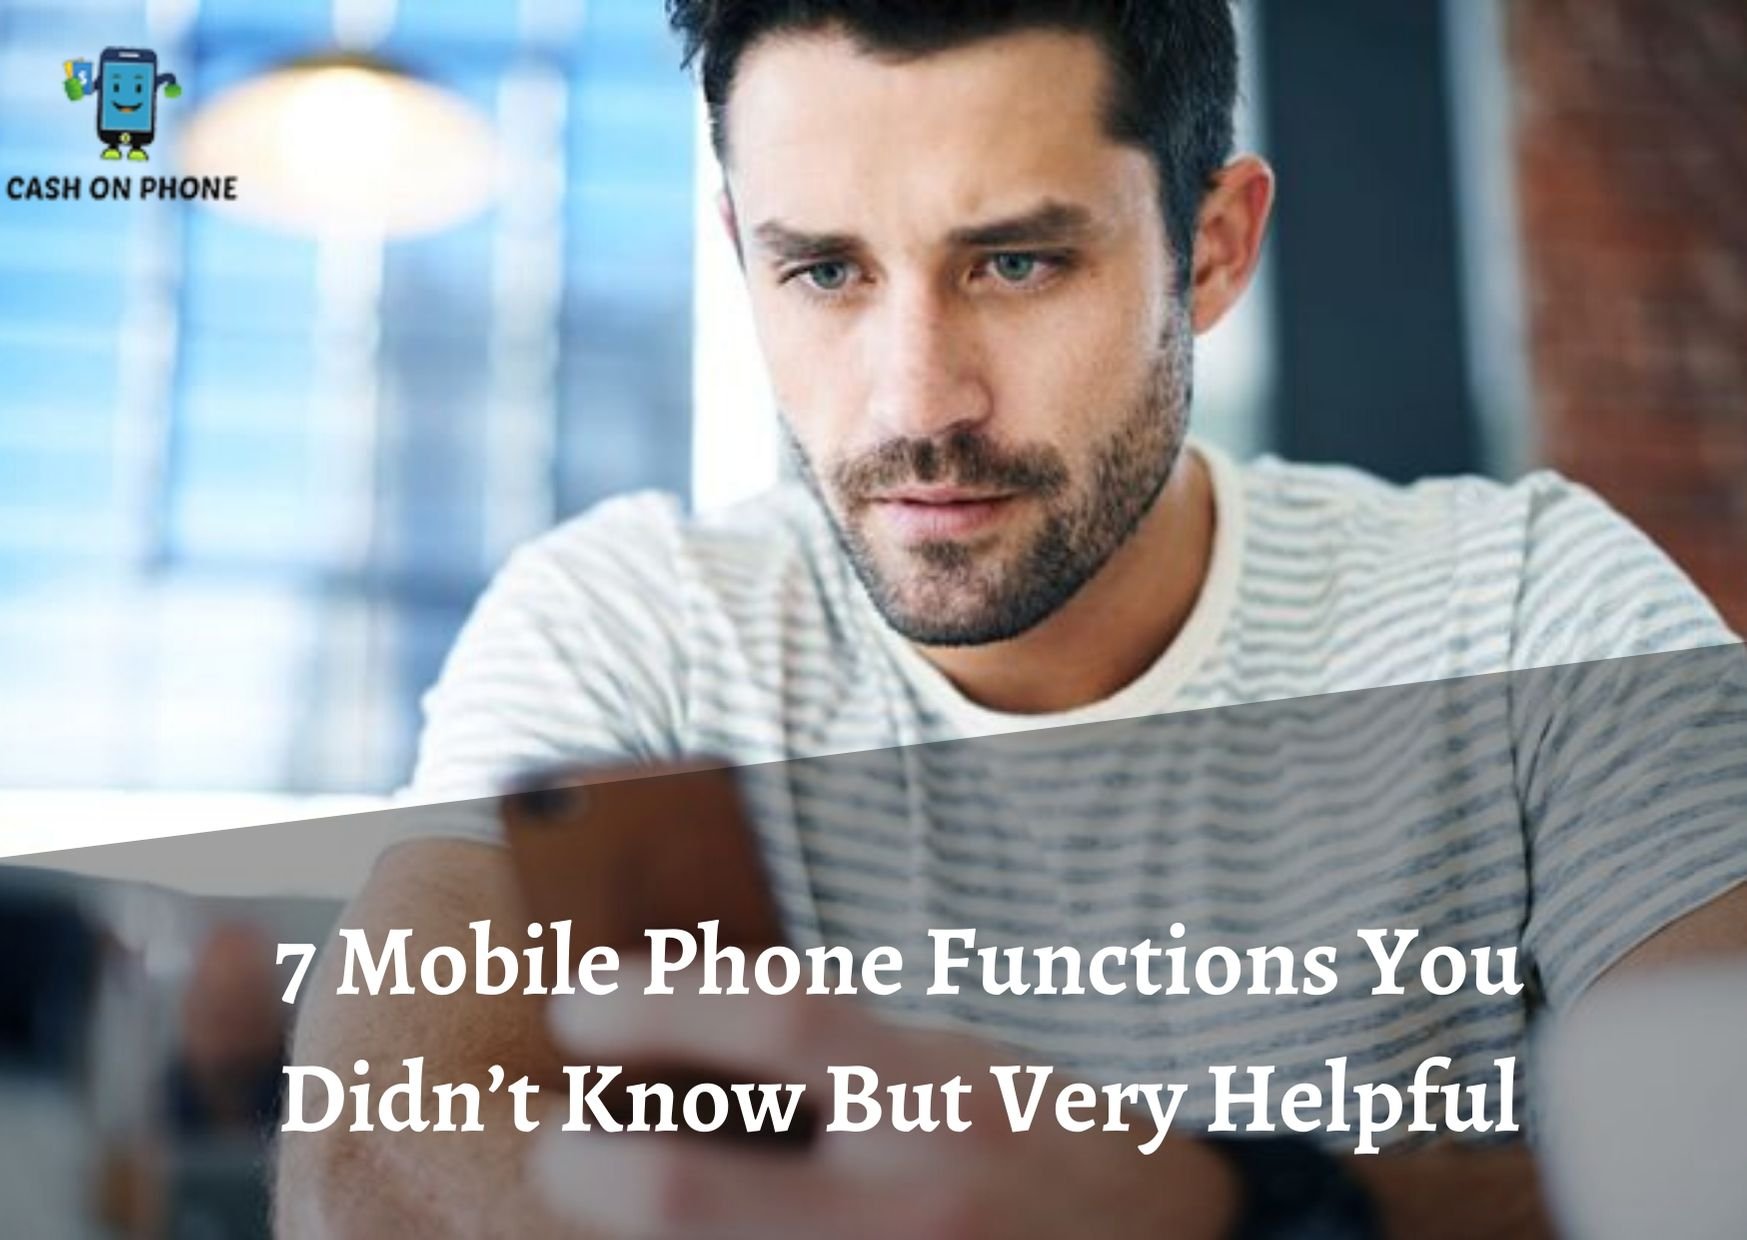 7 Mobile Phone Functions You Didn’t Know But Very Helpful